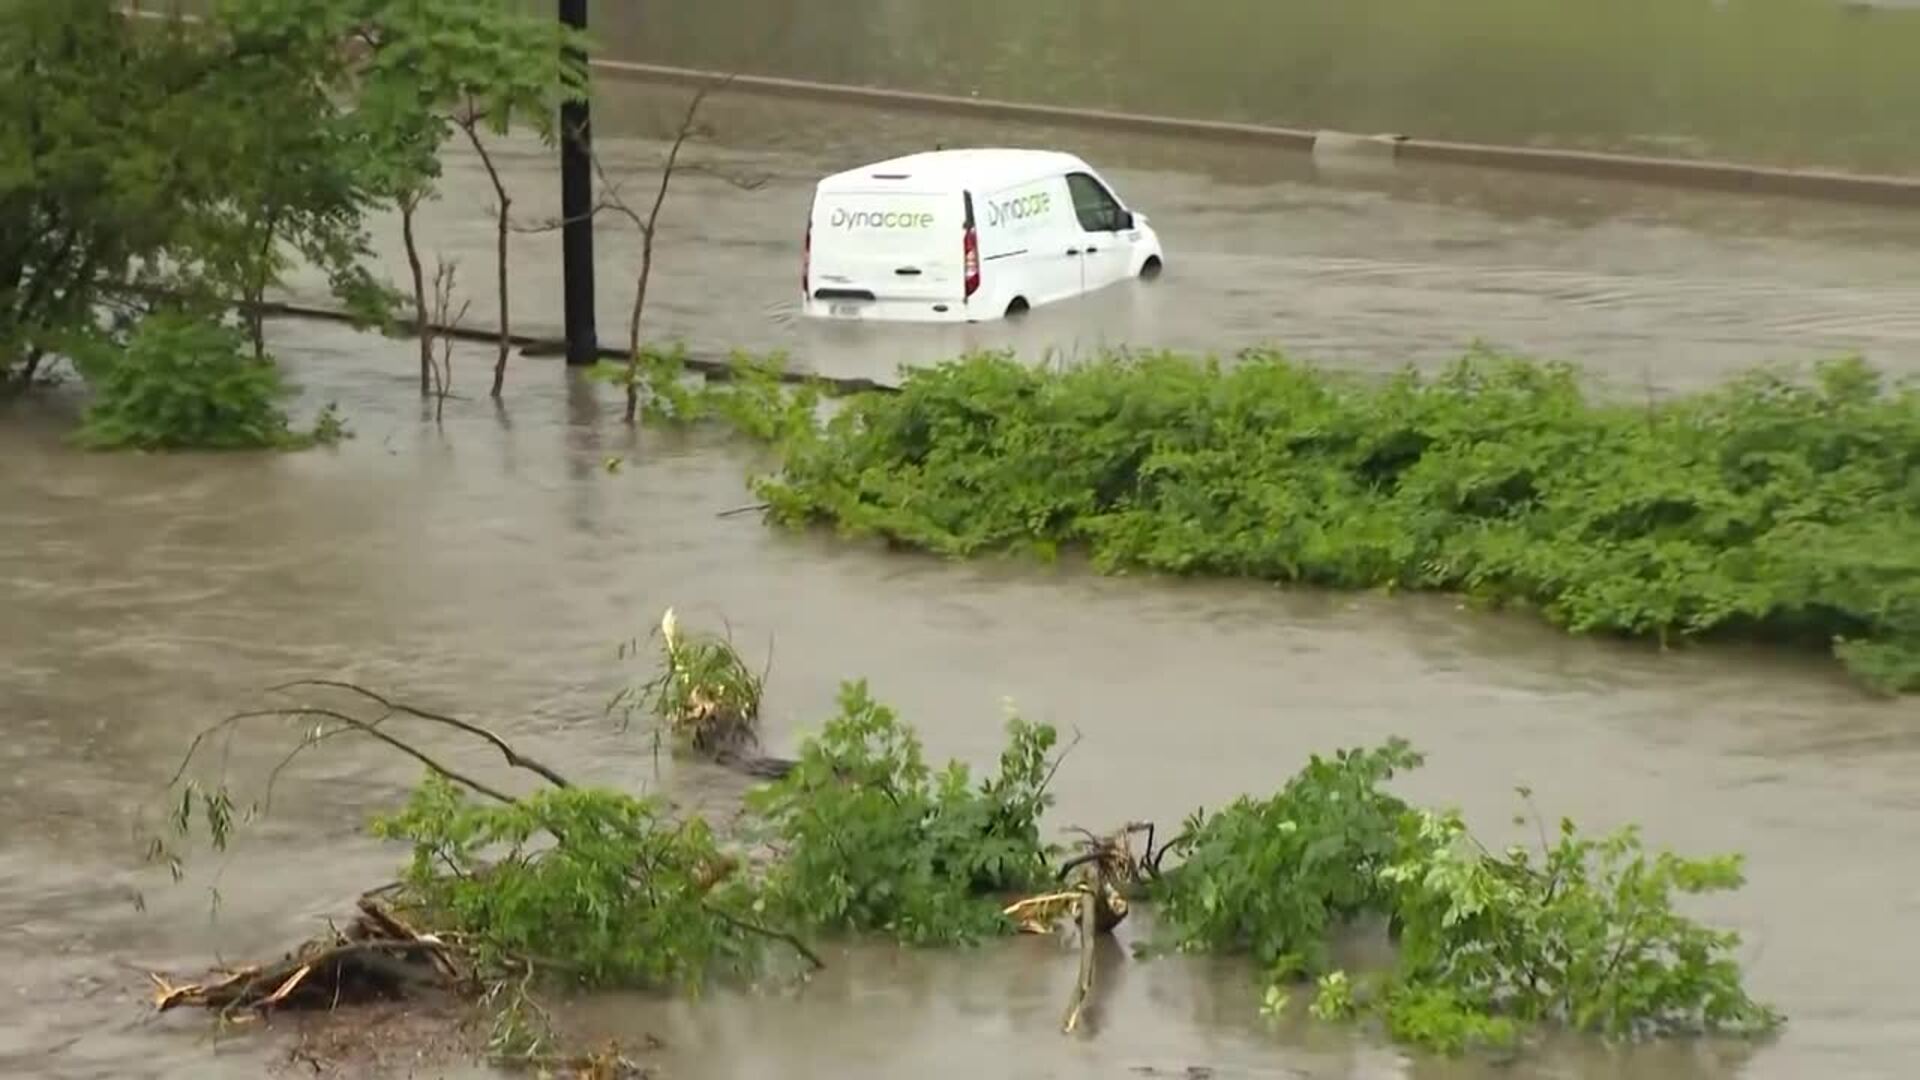 FROM THE SCENE: Don Valley River floods section of DVP, stranding drivers